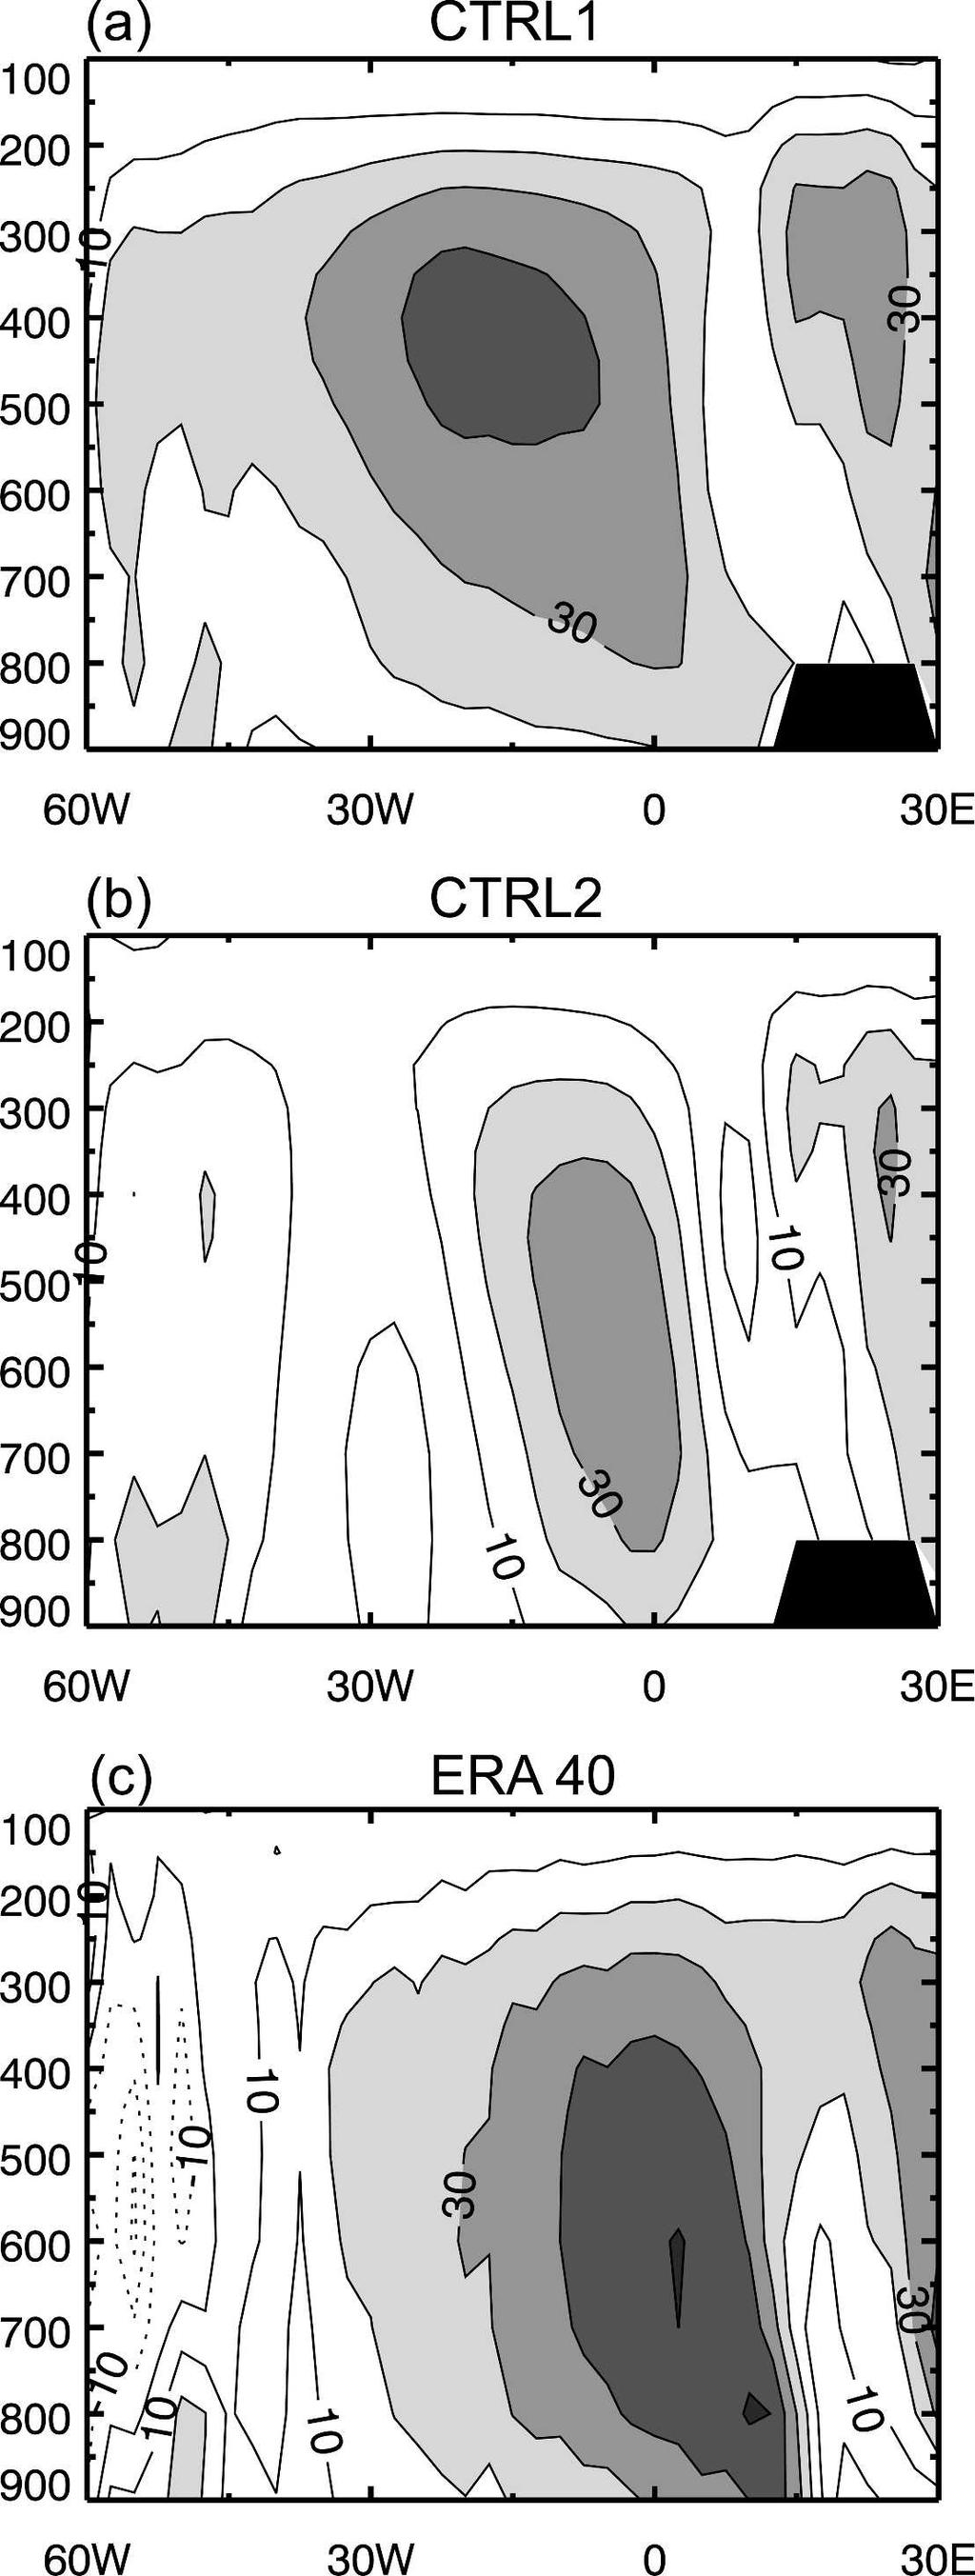 226 J O U R N A L O F C L I M A T E VOLUME 21 At upper levels, the divergent circulation in the zonal-sst experiment (Fig.